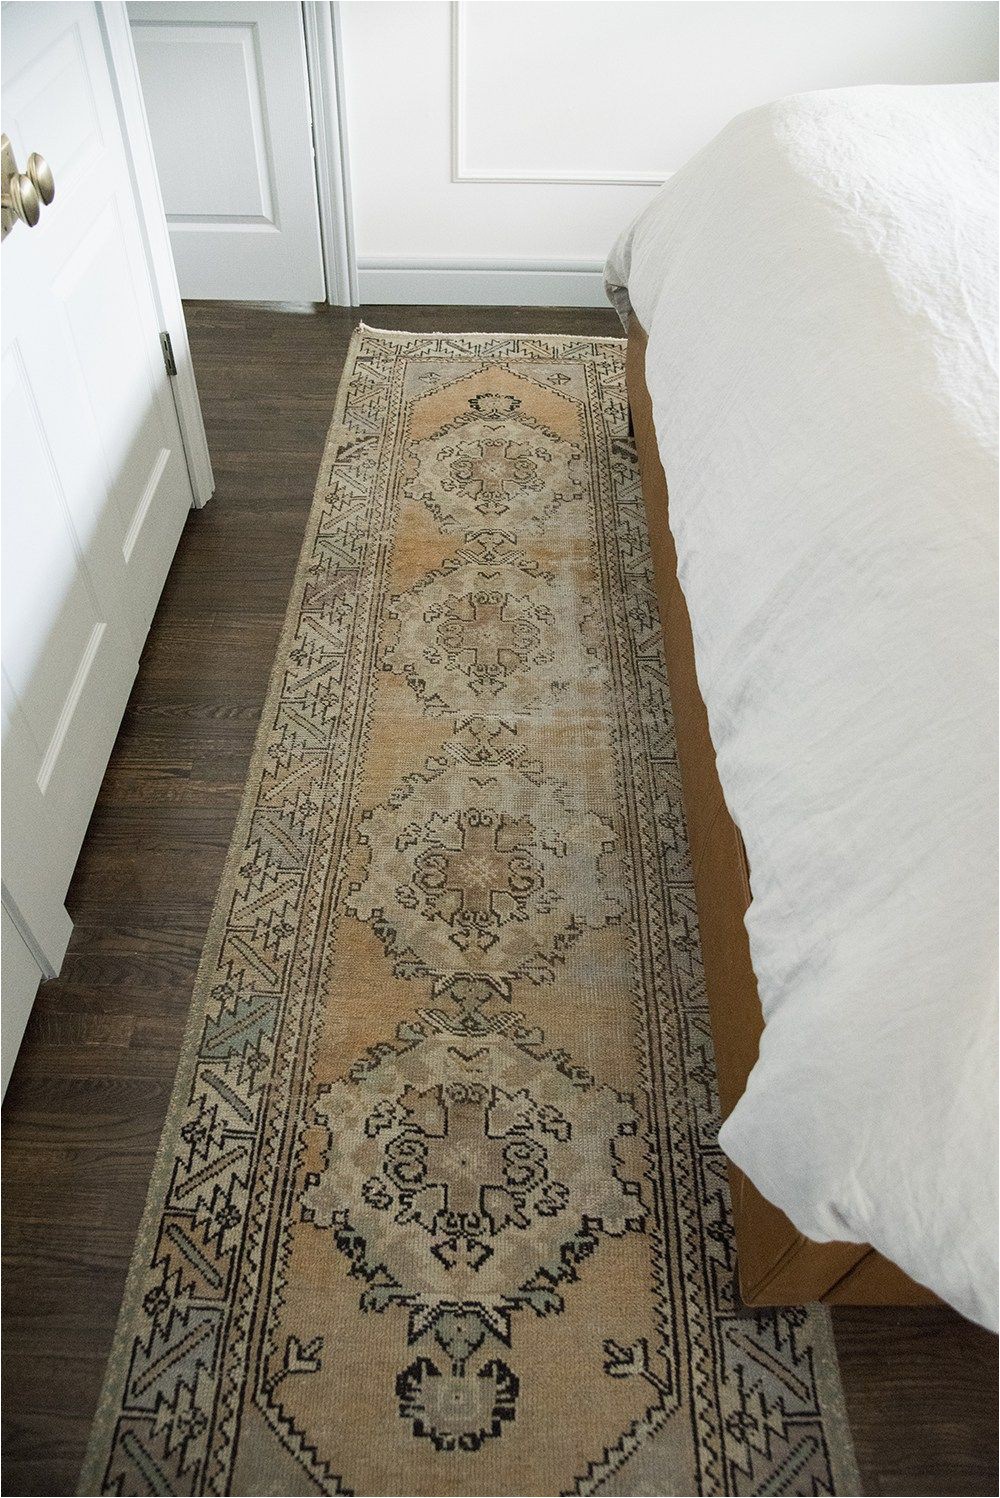 Long Bathroom Runner Rugs Master Bedroom Get the Look Room for Tuesday Blog